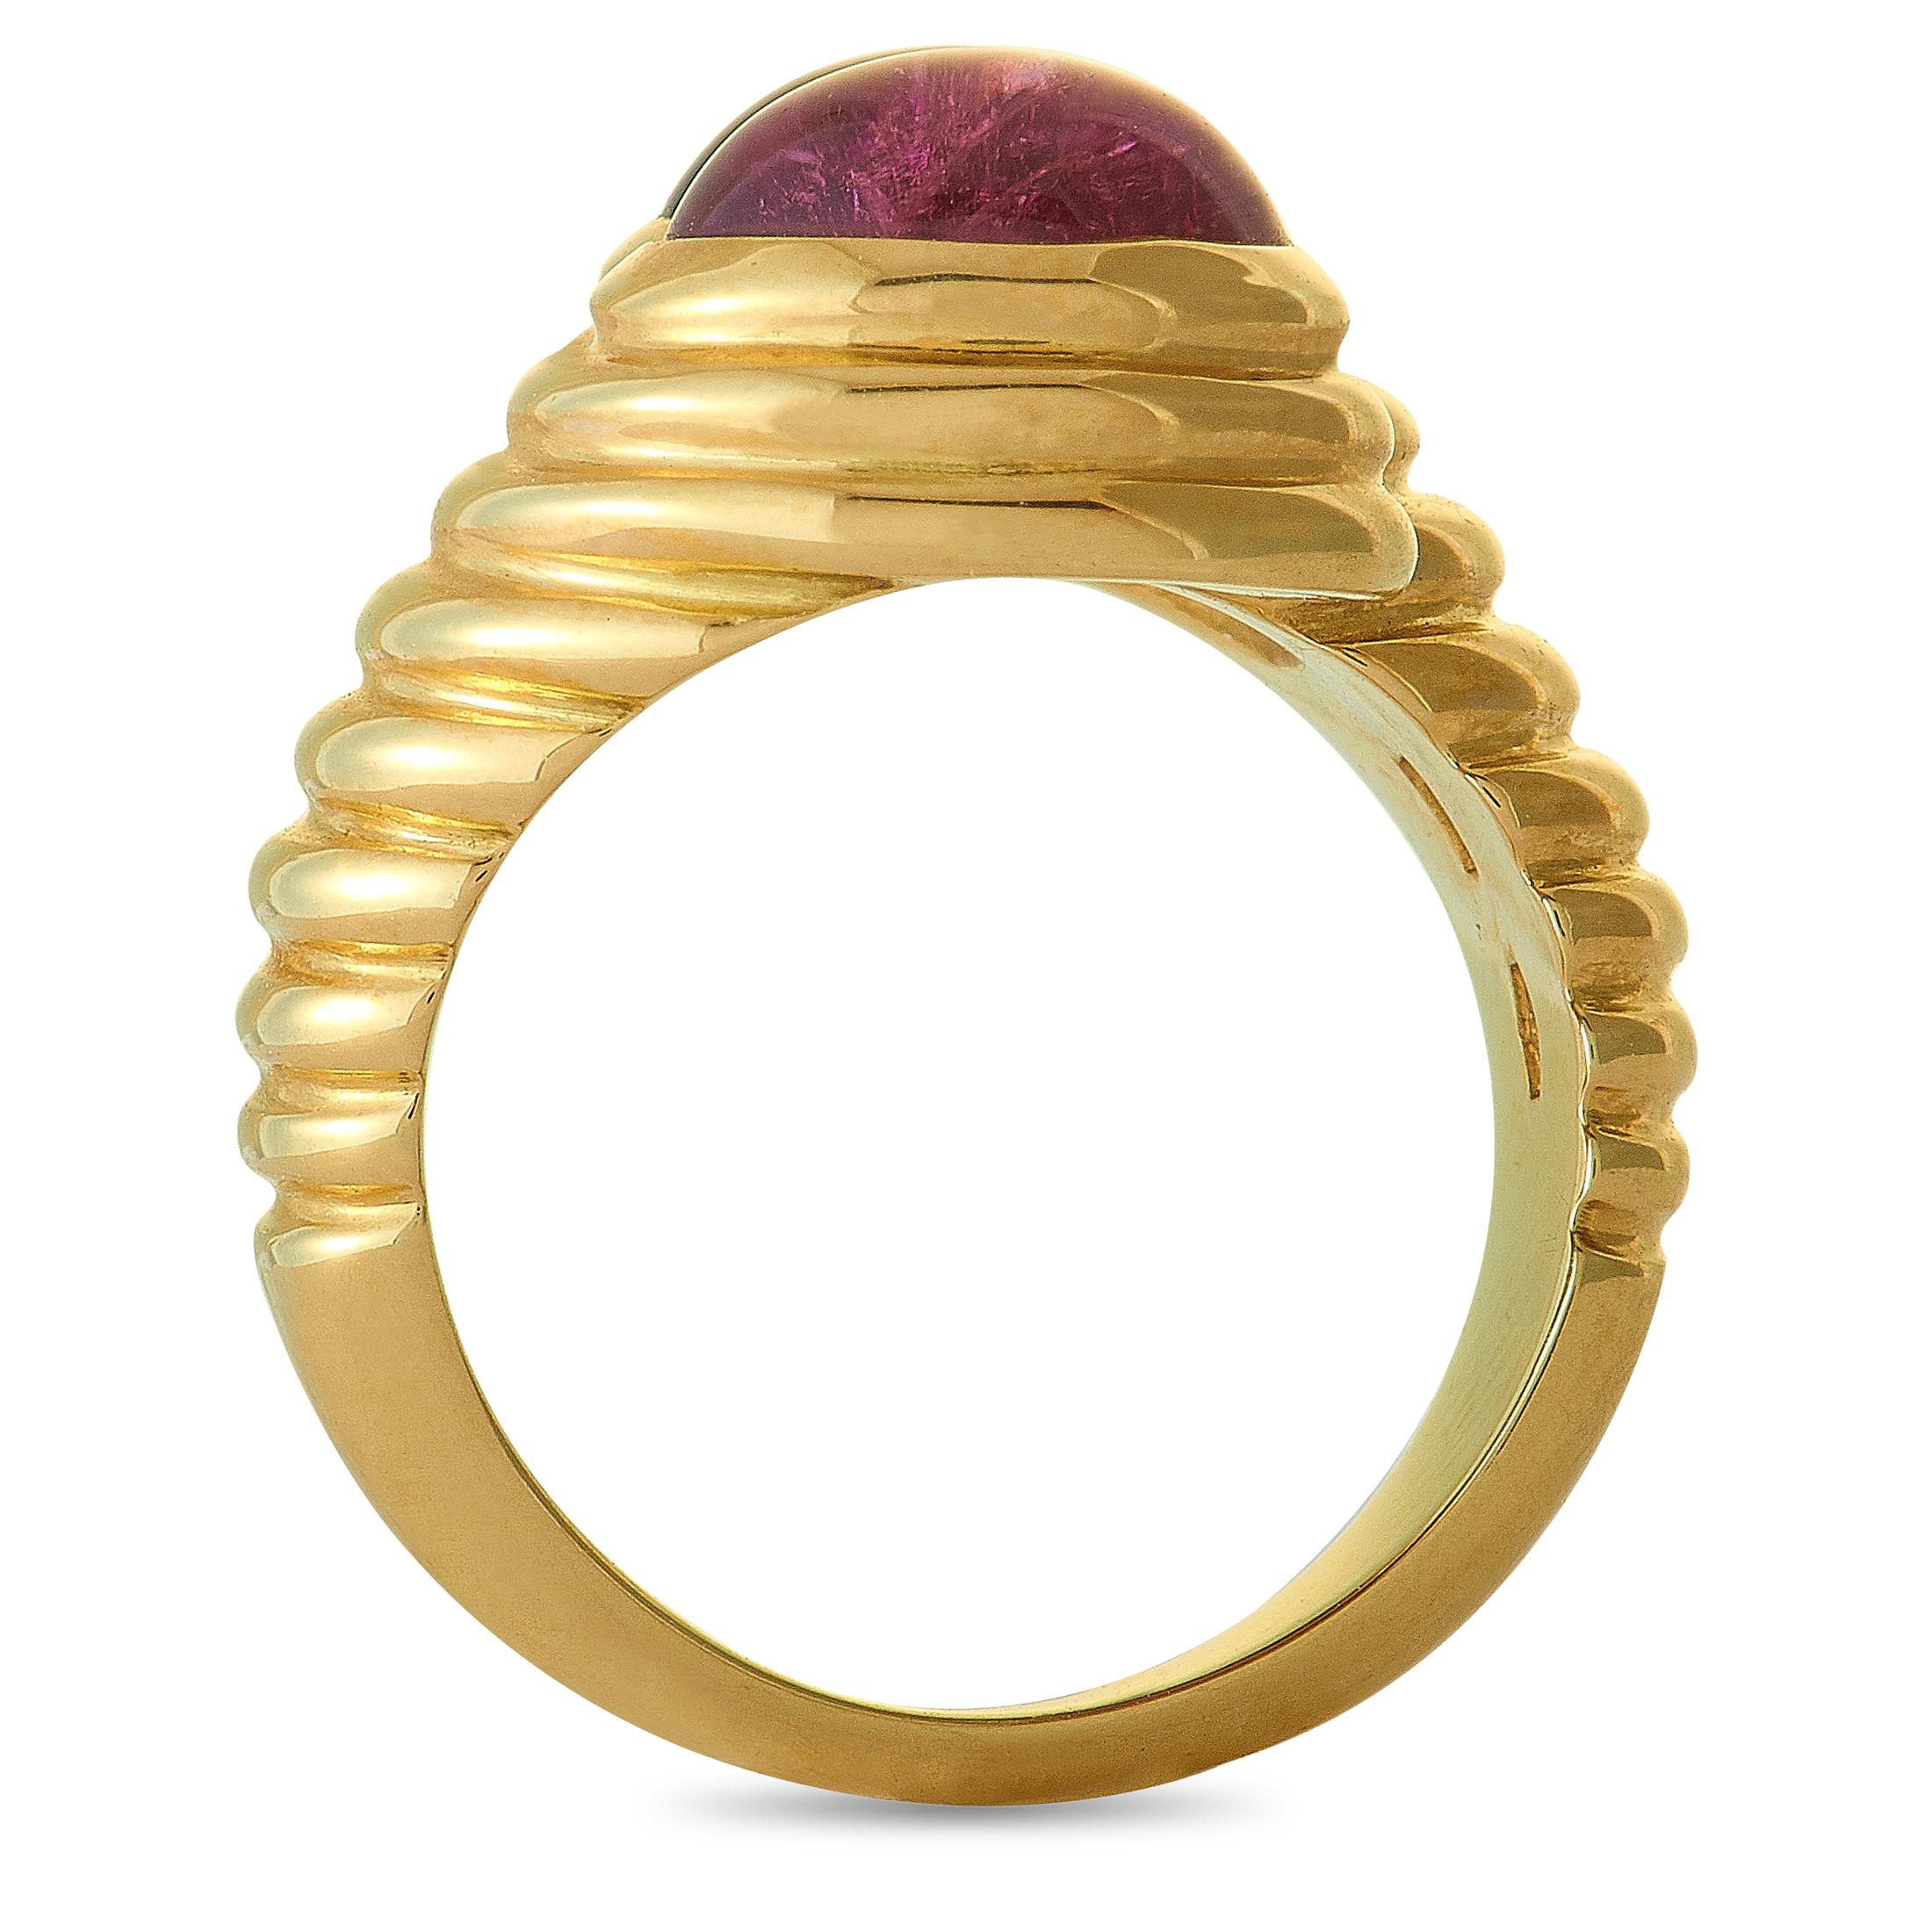 The Bvlgari “Doppio” ring is crafted from 18K yellow gold and set with an amethyst and a tourmaline. The ring weighs 12.8 grams, boasting band thickness of 3 mm and top height of 7 mm, while top dimensions measure 10 by 17 mm.

This item is offered